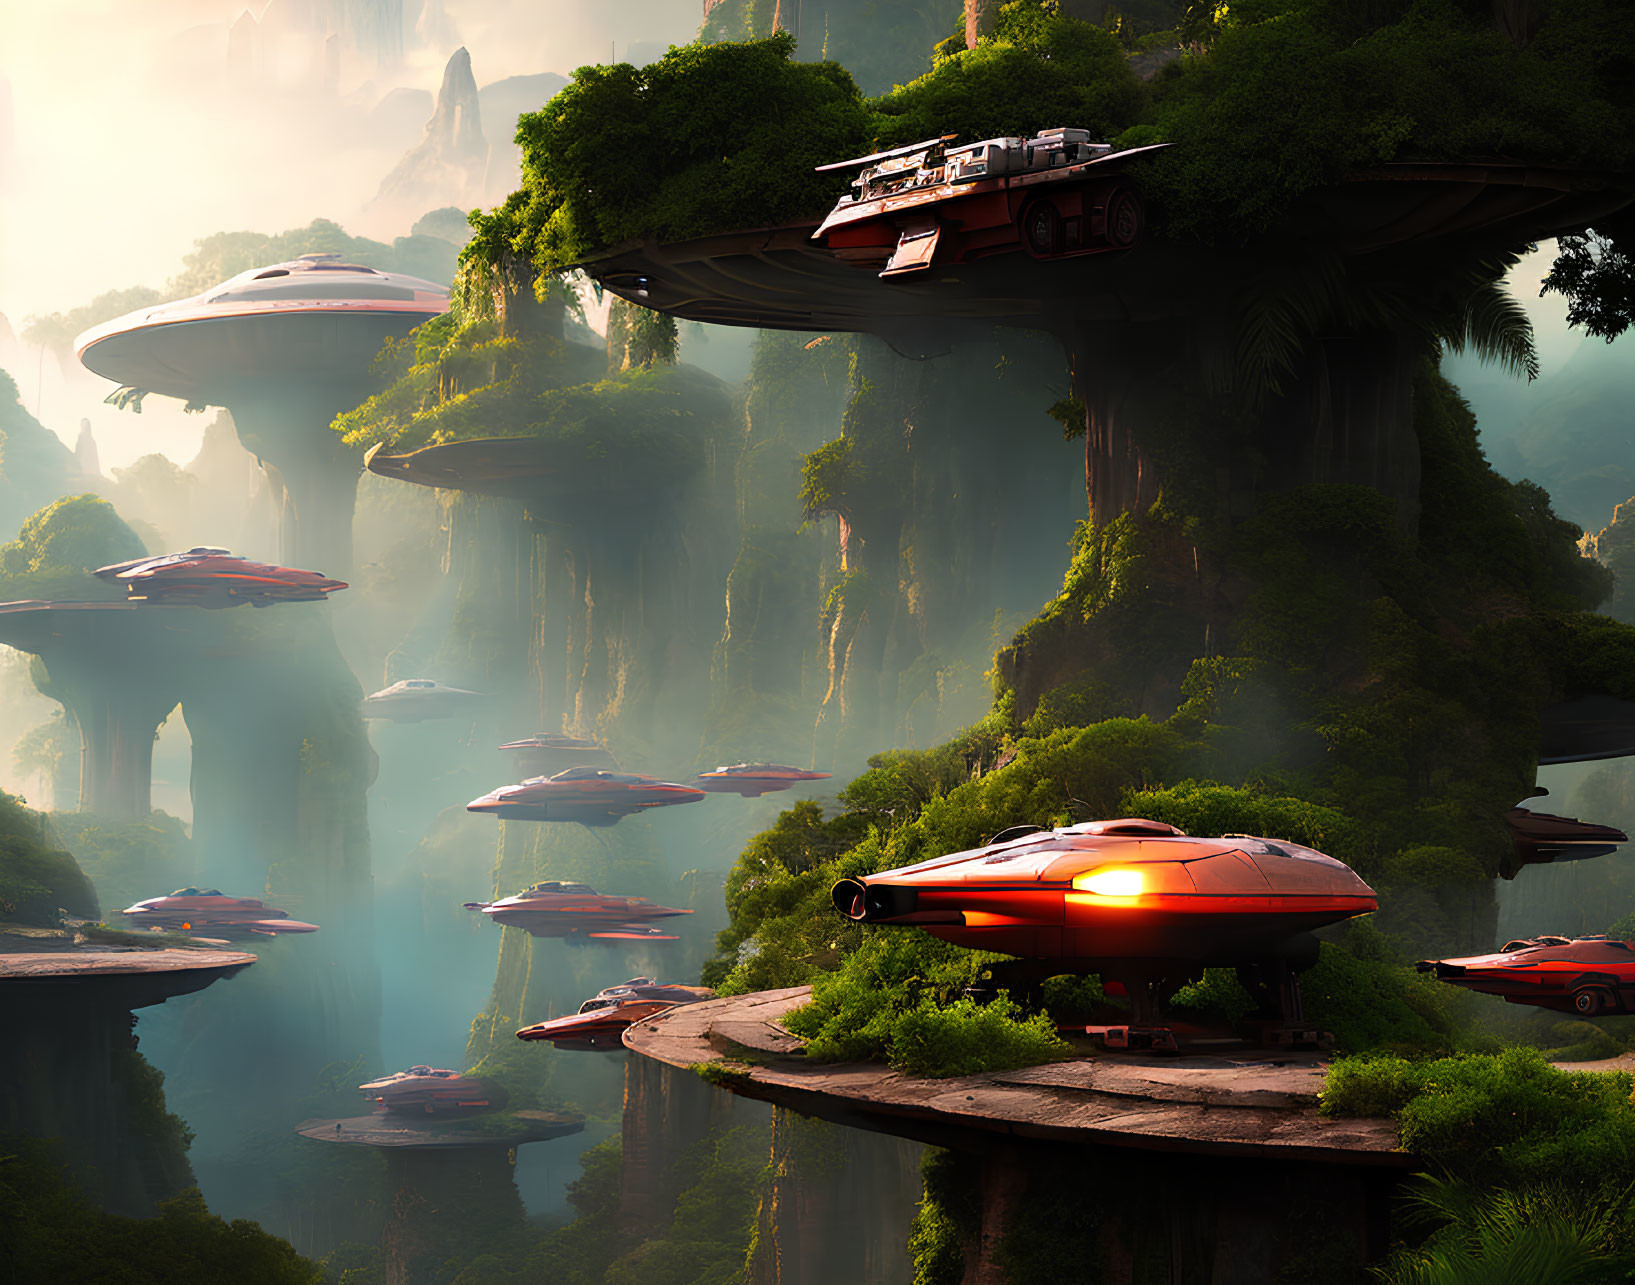 Futuristic sci-fi landscape with greenery, floating islands, and red flying saucers